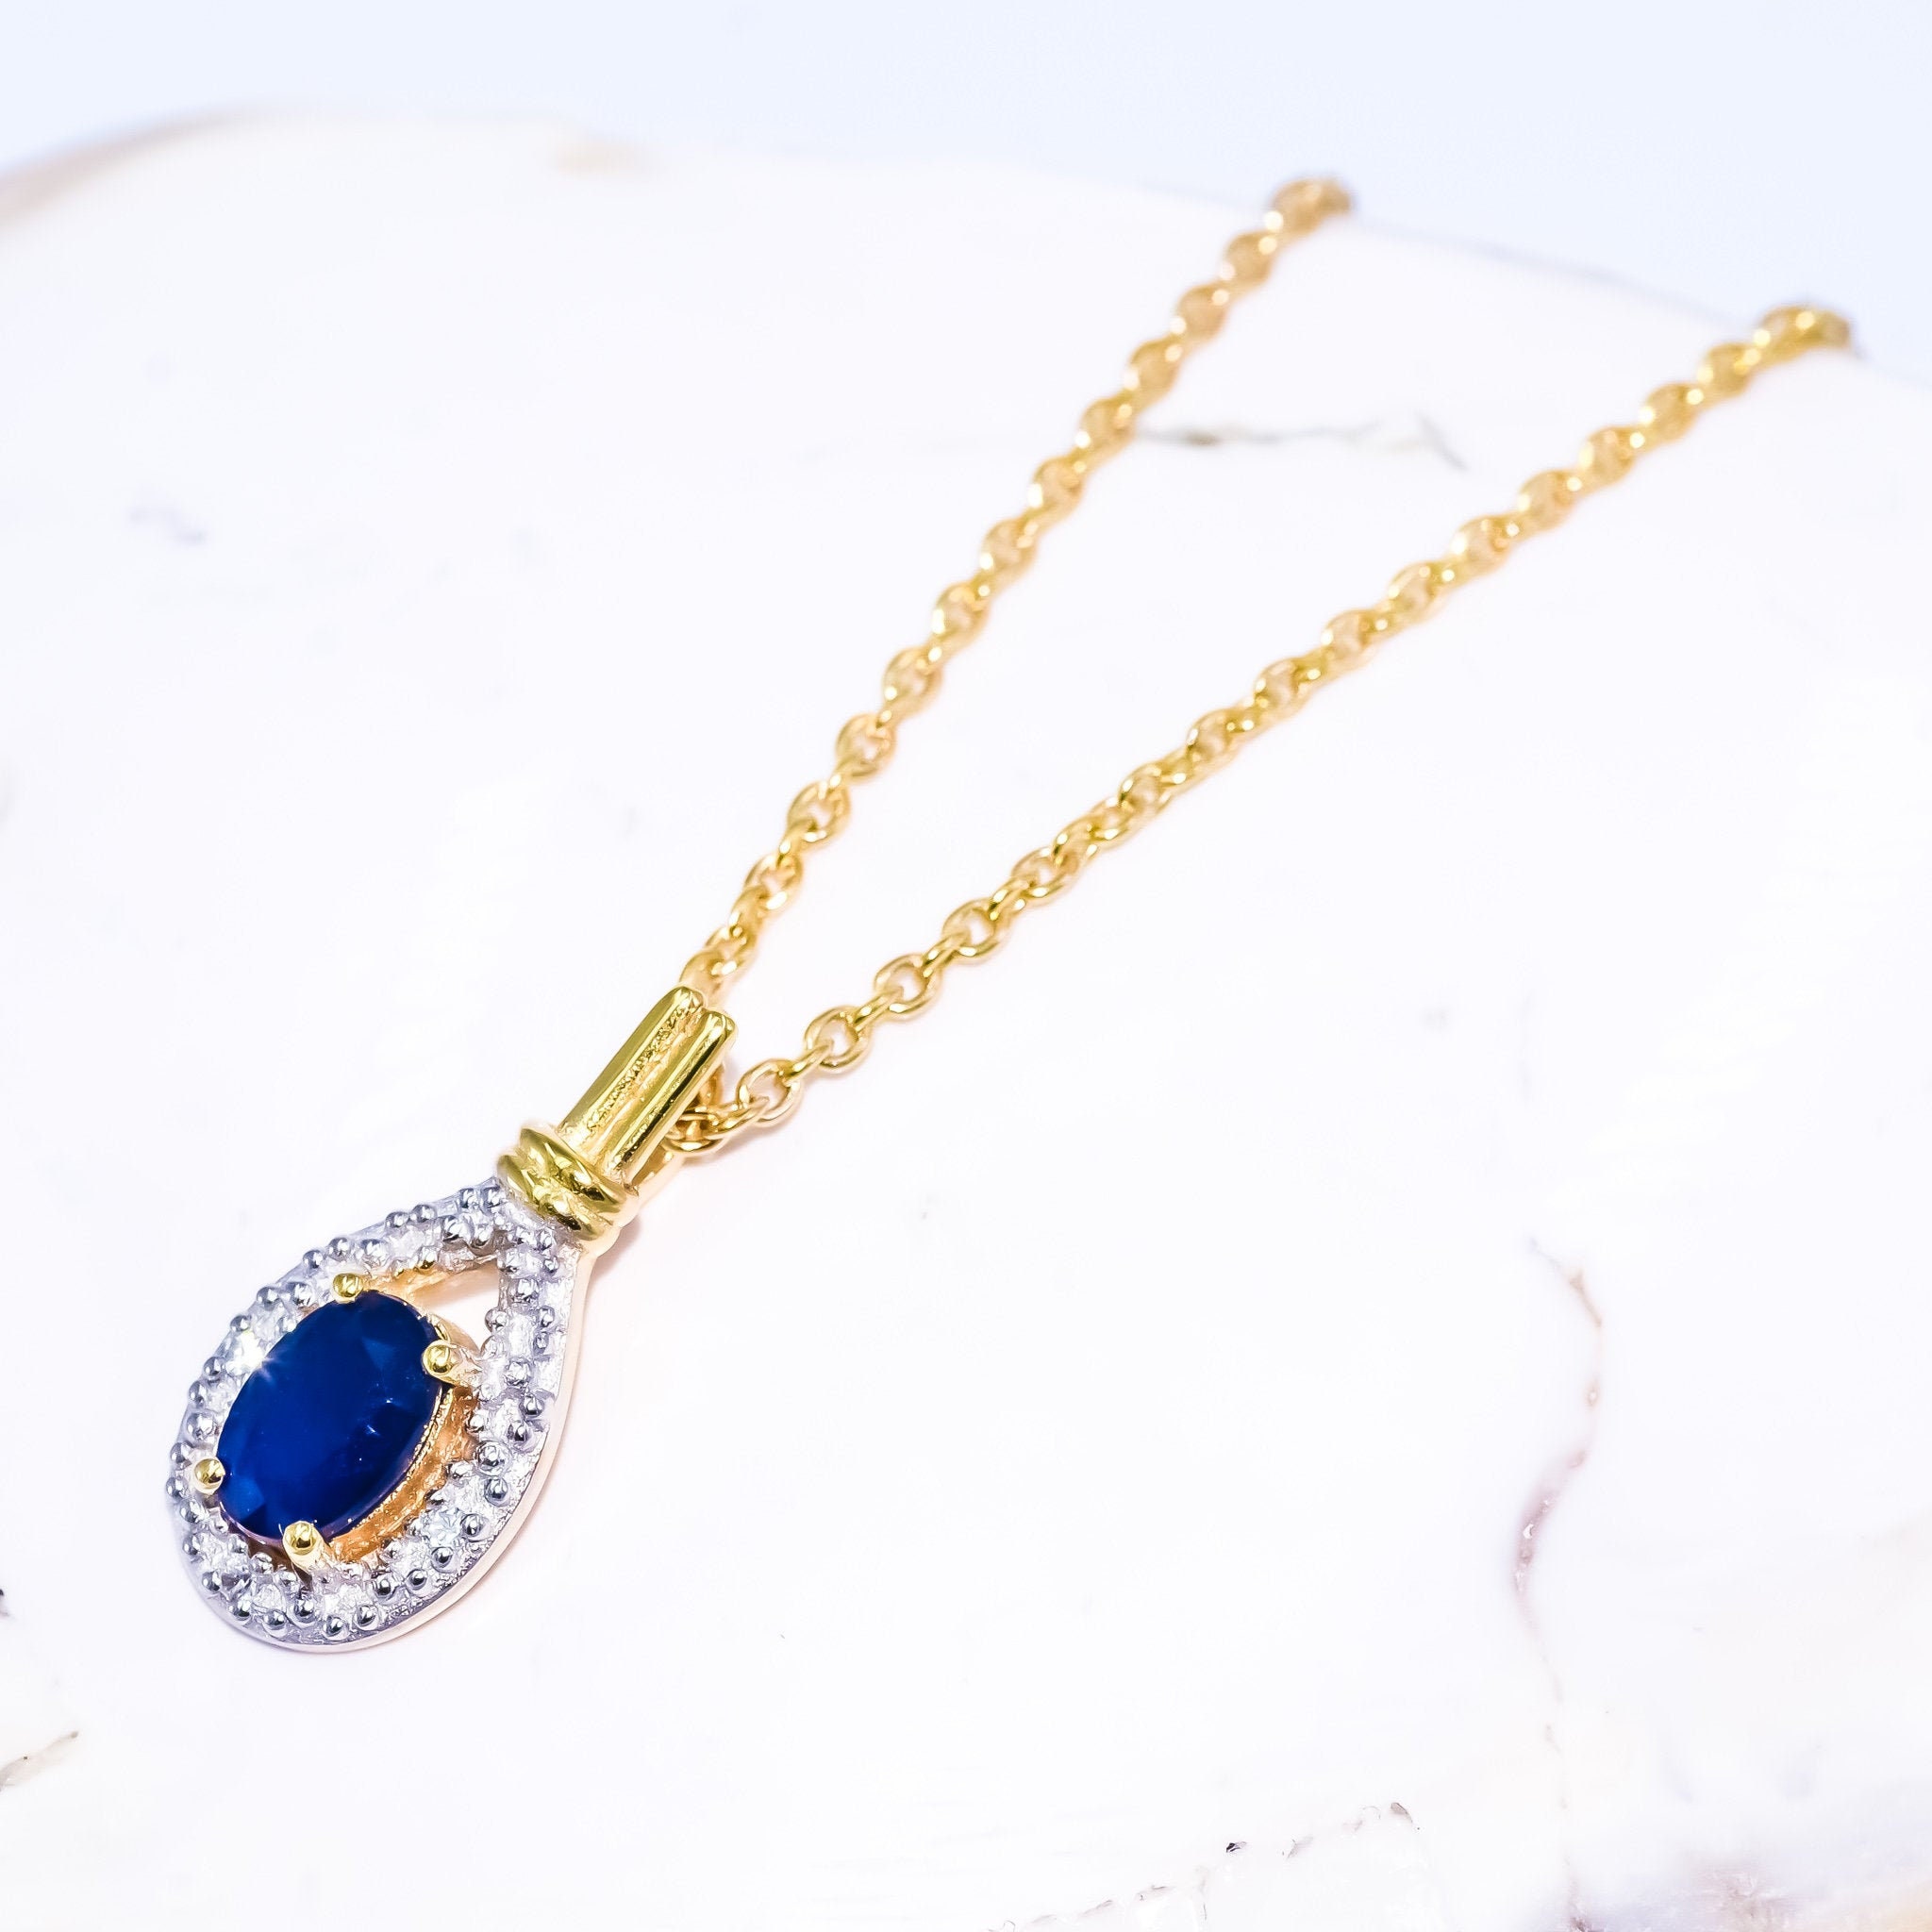 Dainty Sapphire and Diamonds Necklace